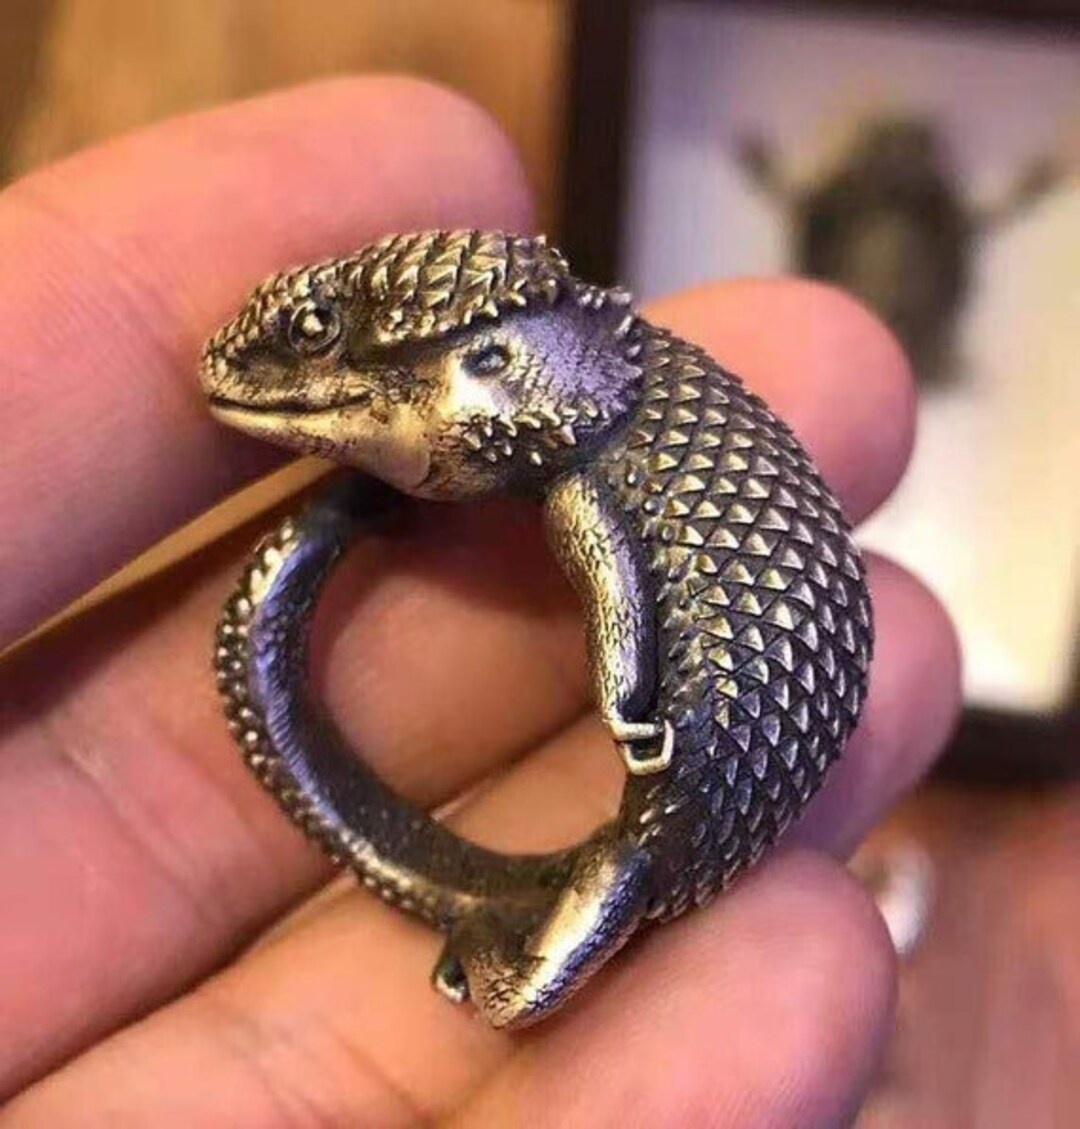 Pet Ring Etsy Favourite My Ring Jewelry 24K Lover Bearded Jewelry Eyes Beardies Dragon - Dragon Ring Bearded Gold Reptile Handcrafted